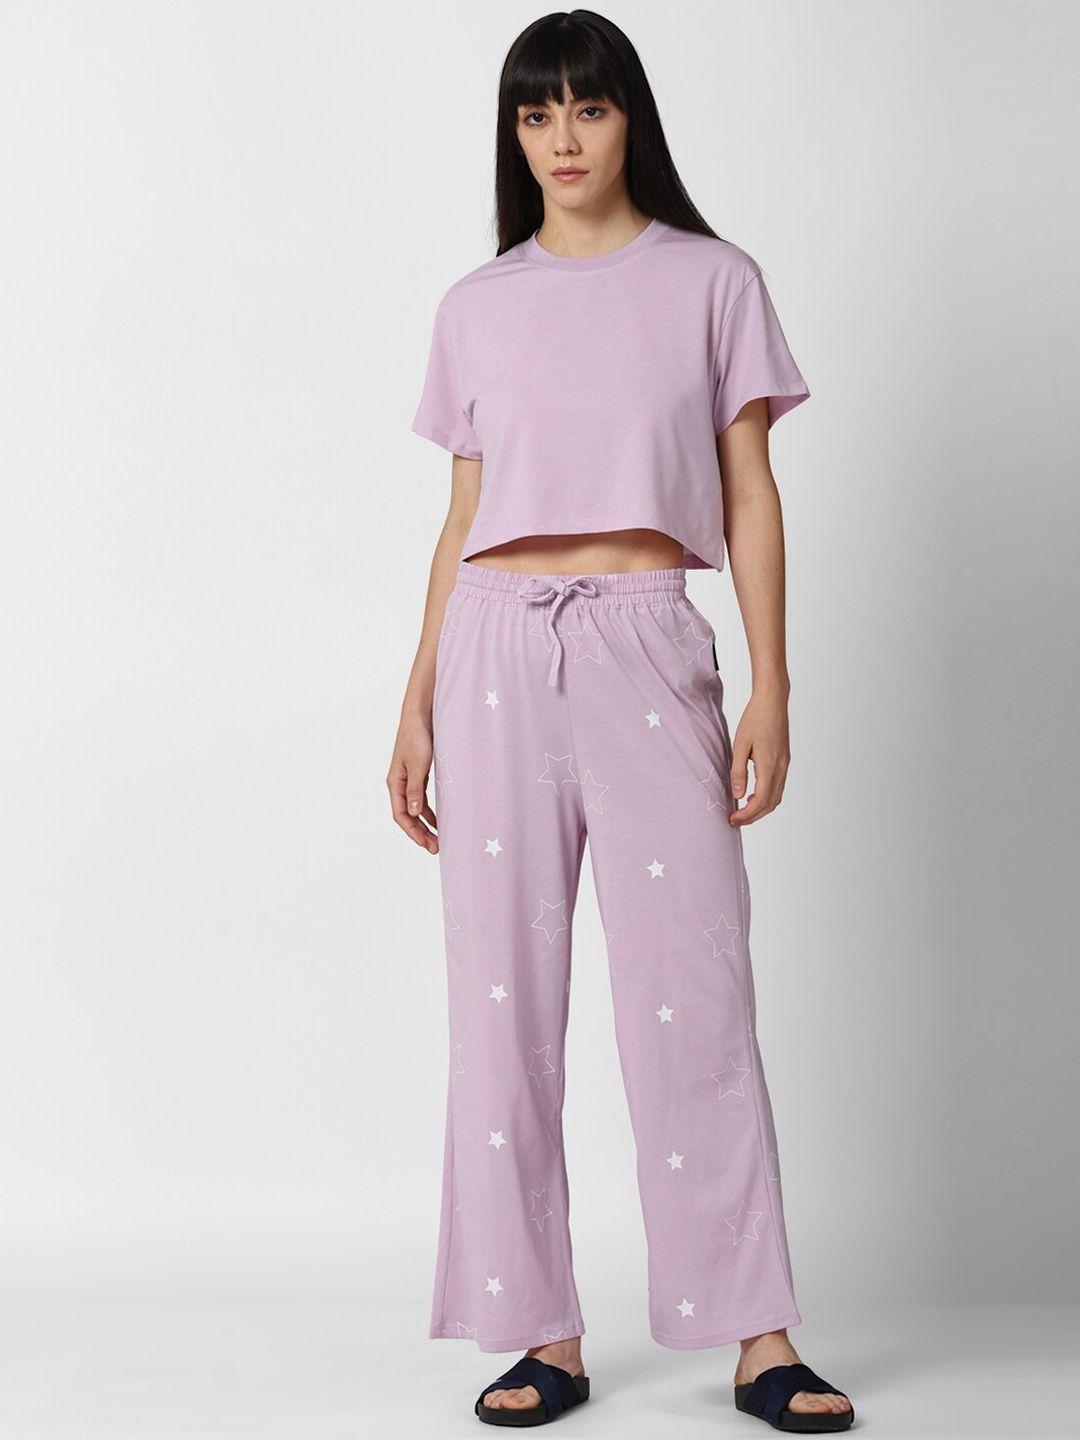 forever-21-women-purple-&-white-printed-night-suit